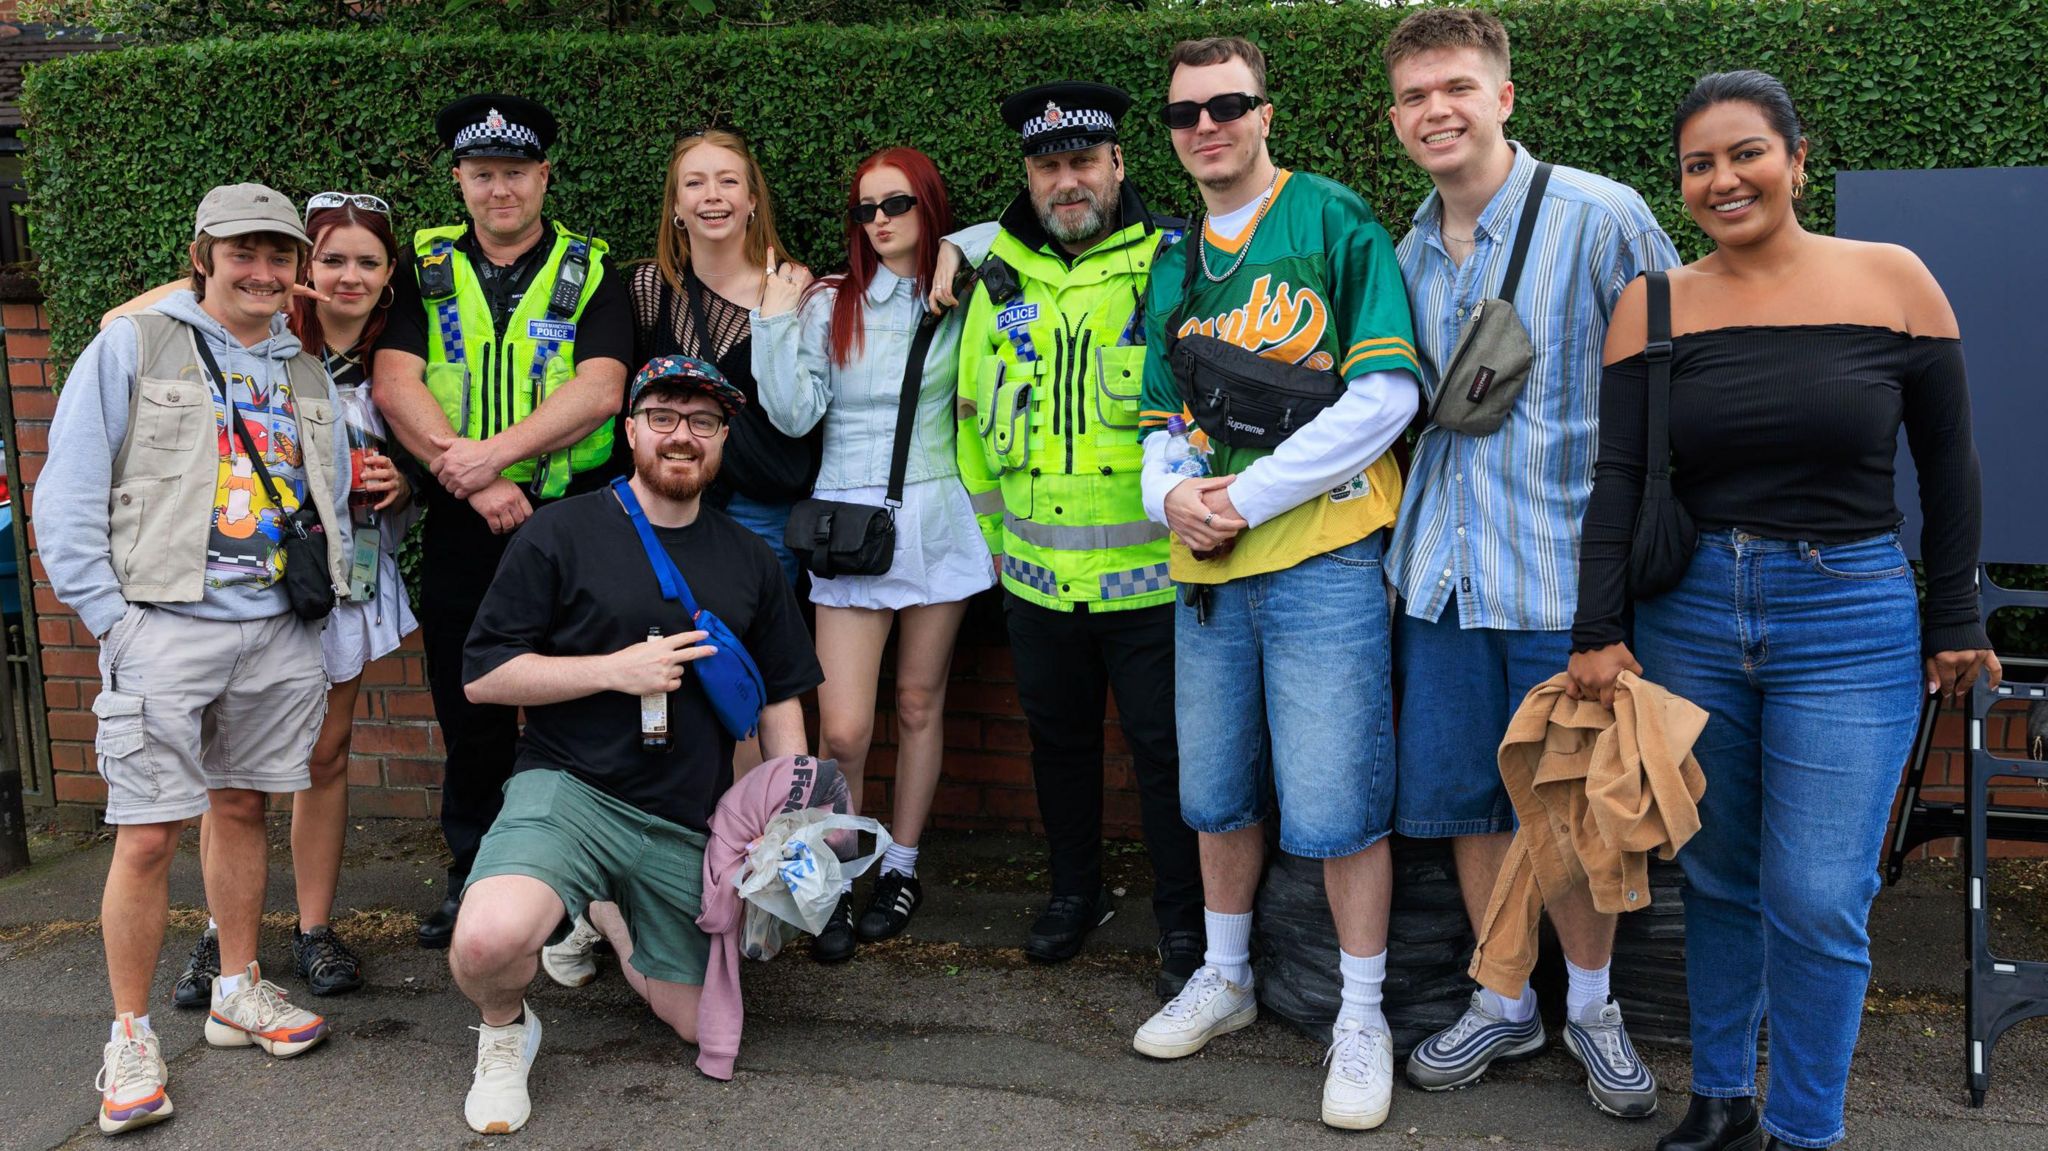 Two police officers pose with eight people attending Parklife festival in Manchester